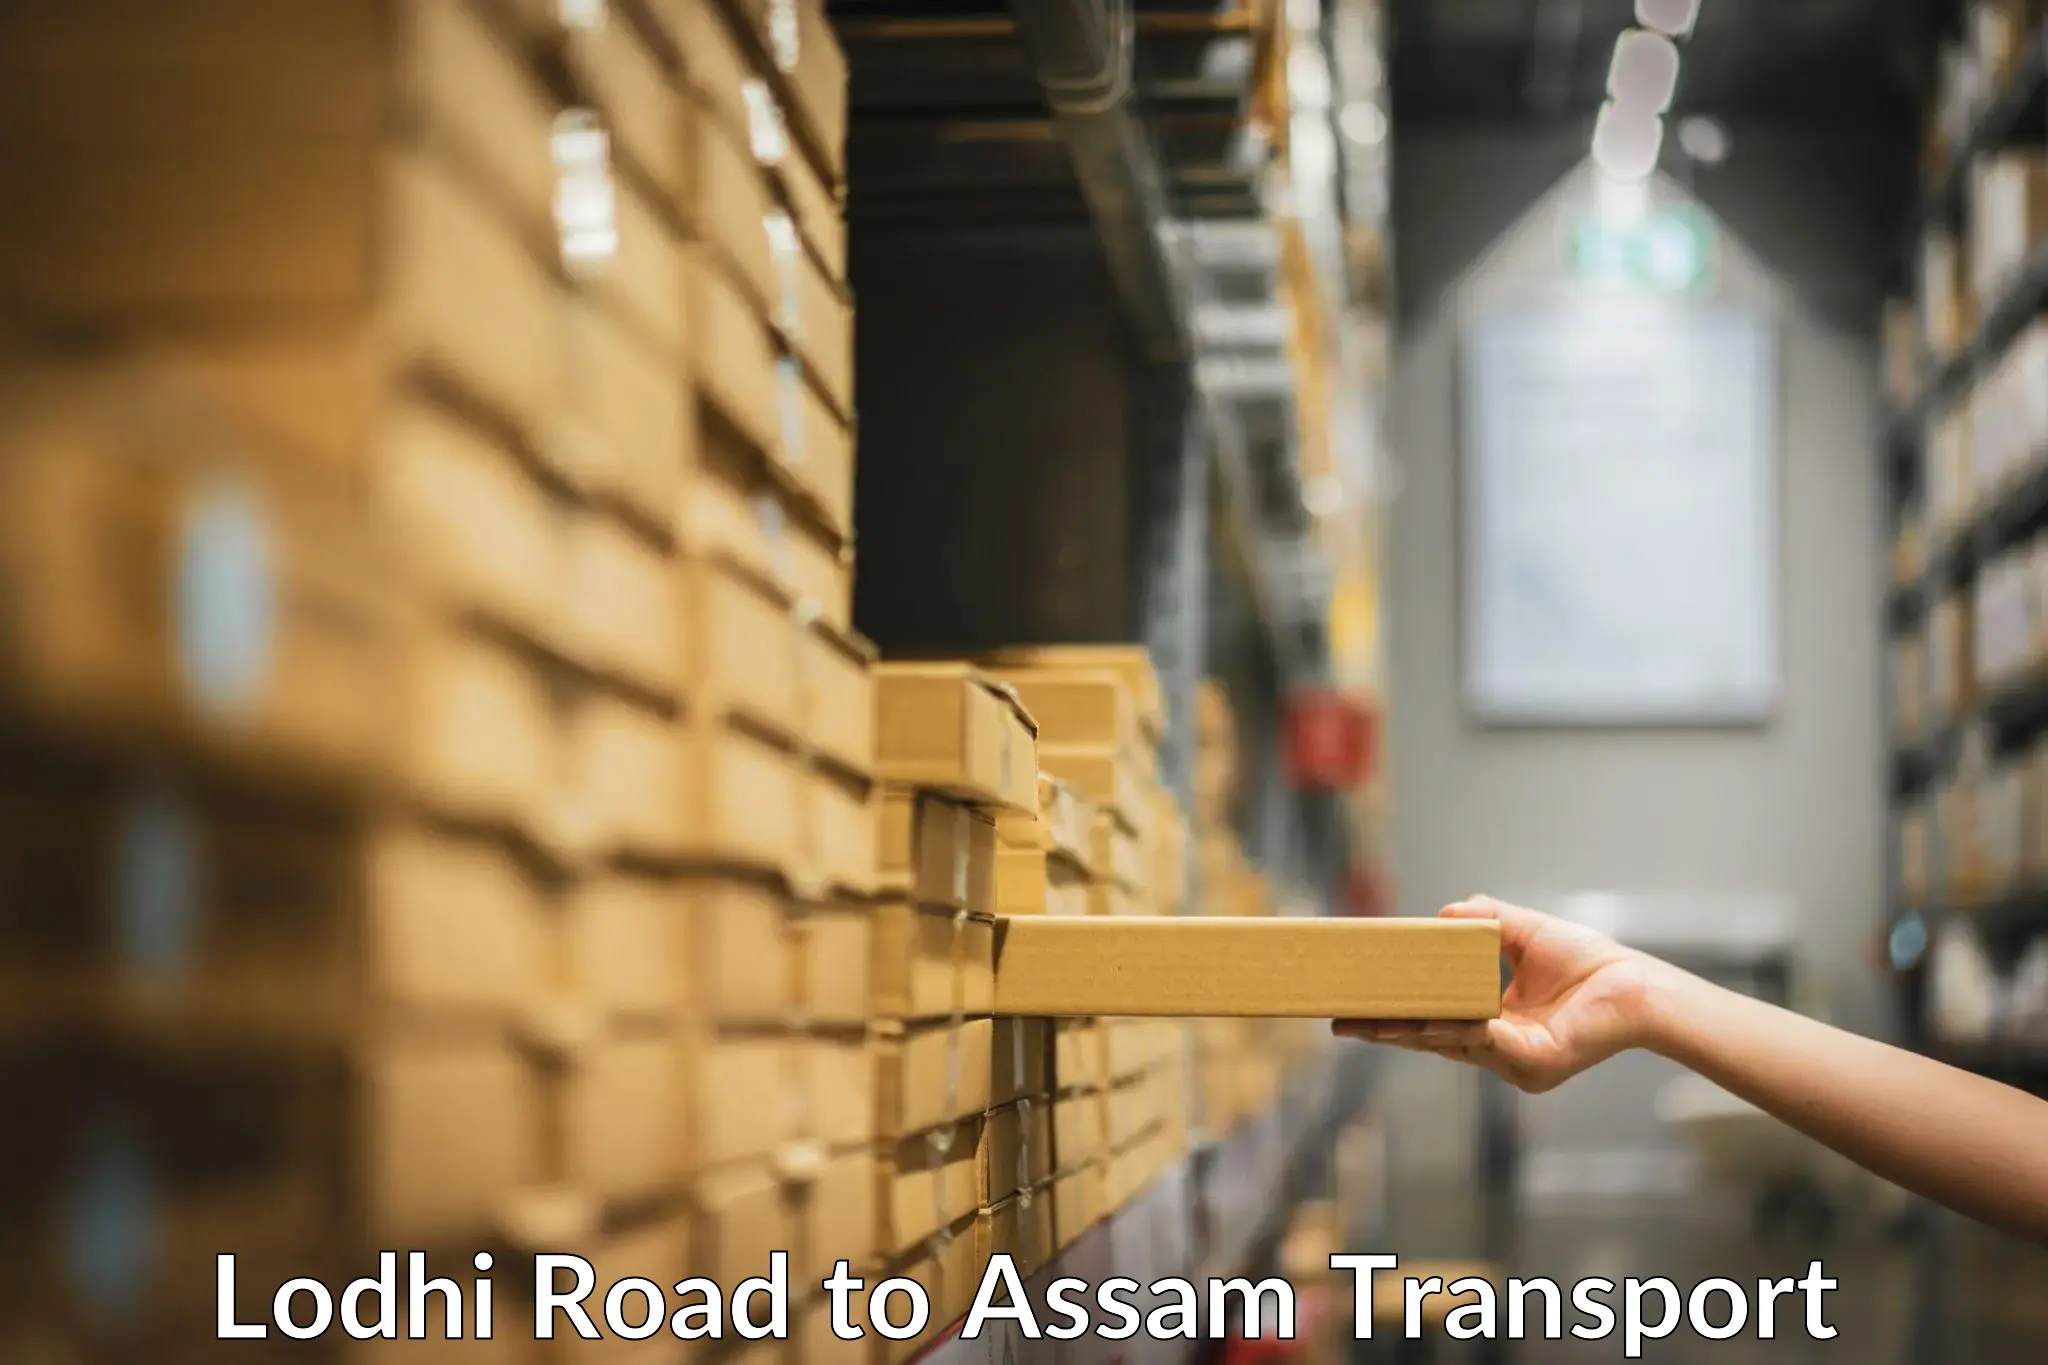 Express transport services in Lodhi Road to Nalbari